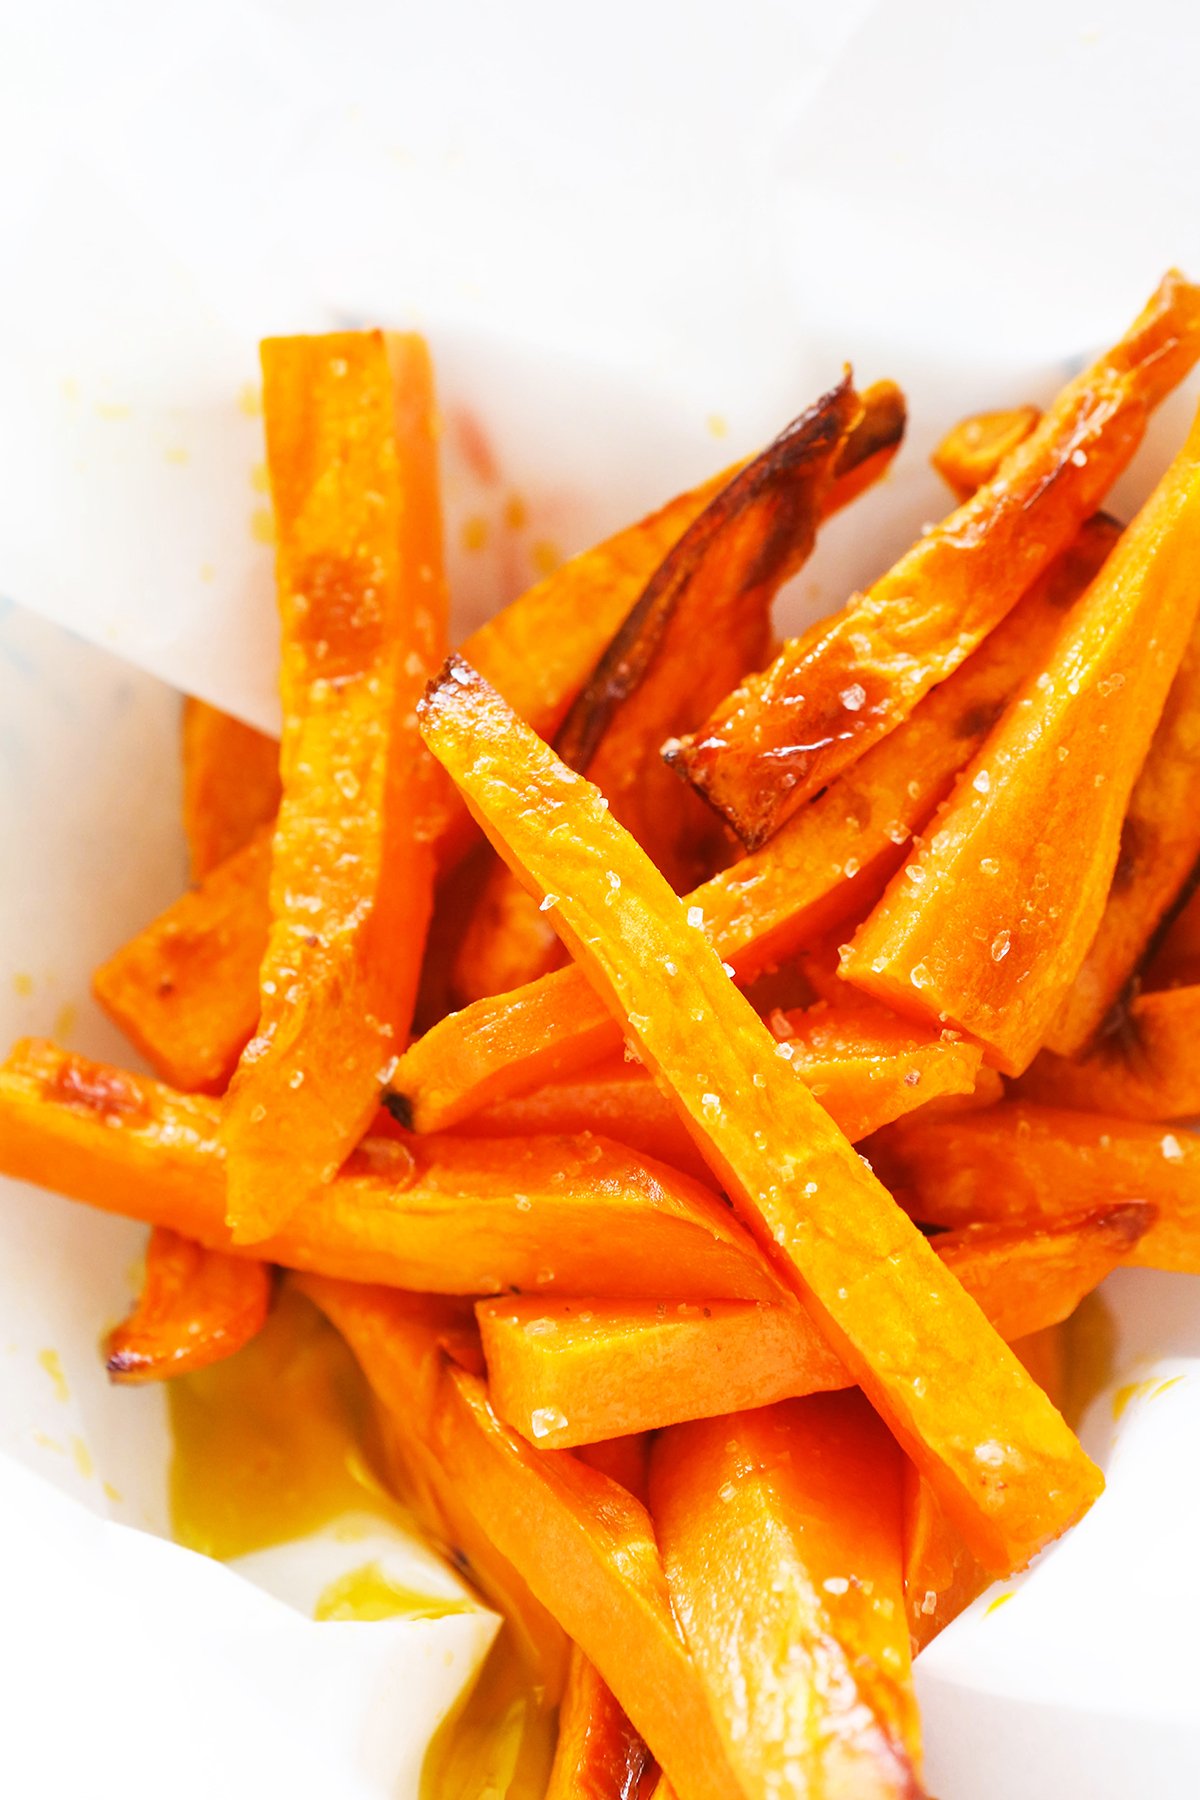 Sweet potato fries in parchment paper, sprinkled with salt.